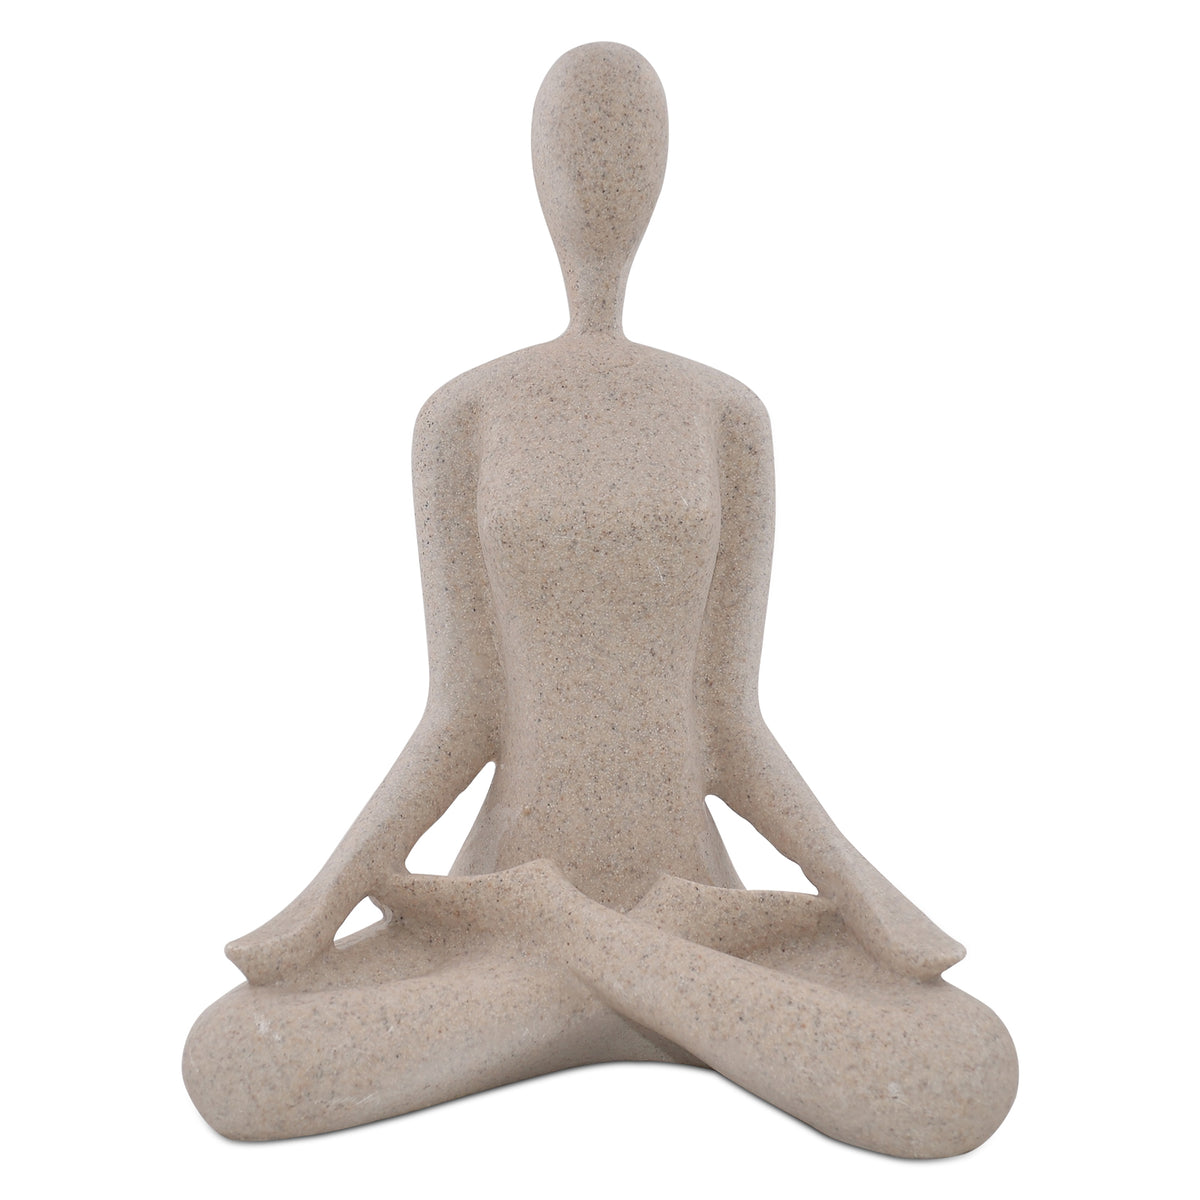 Yoga Pose Statues | Storied Roots